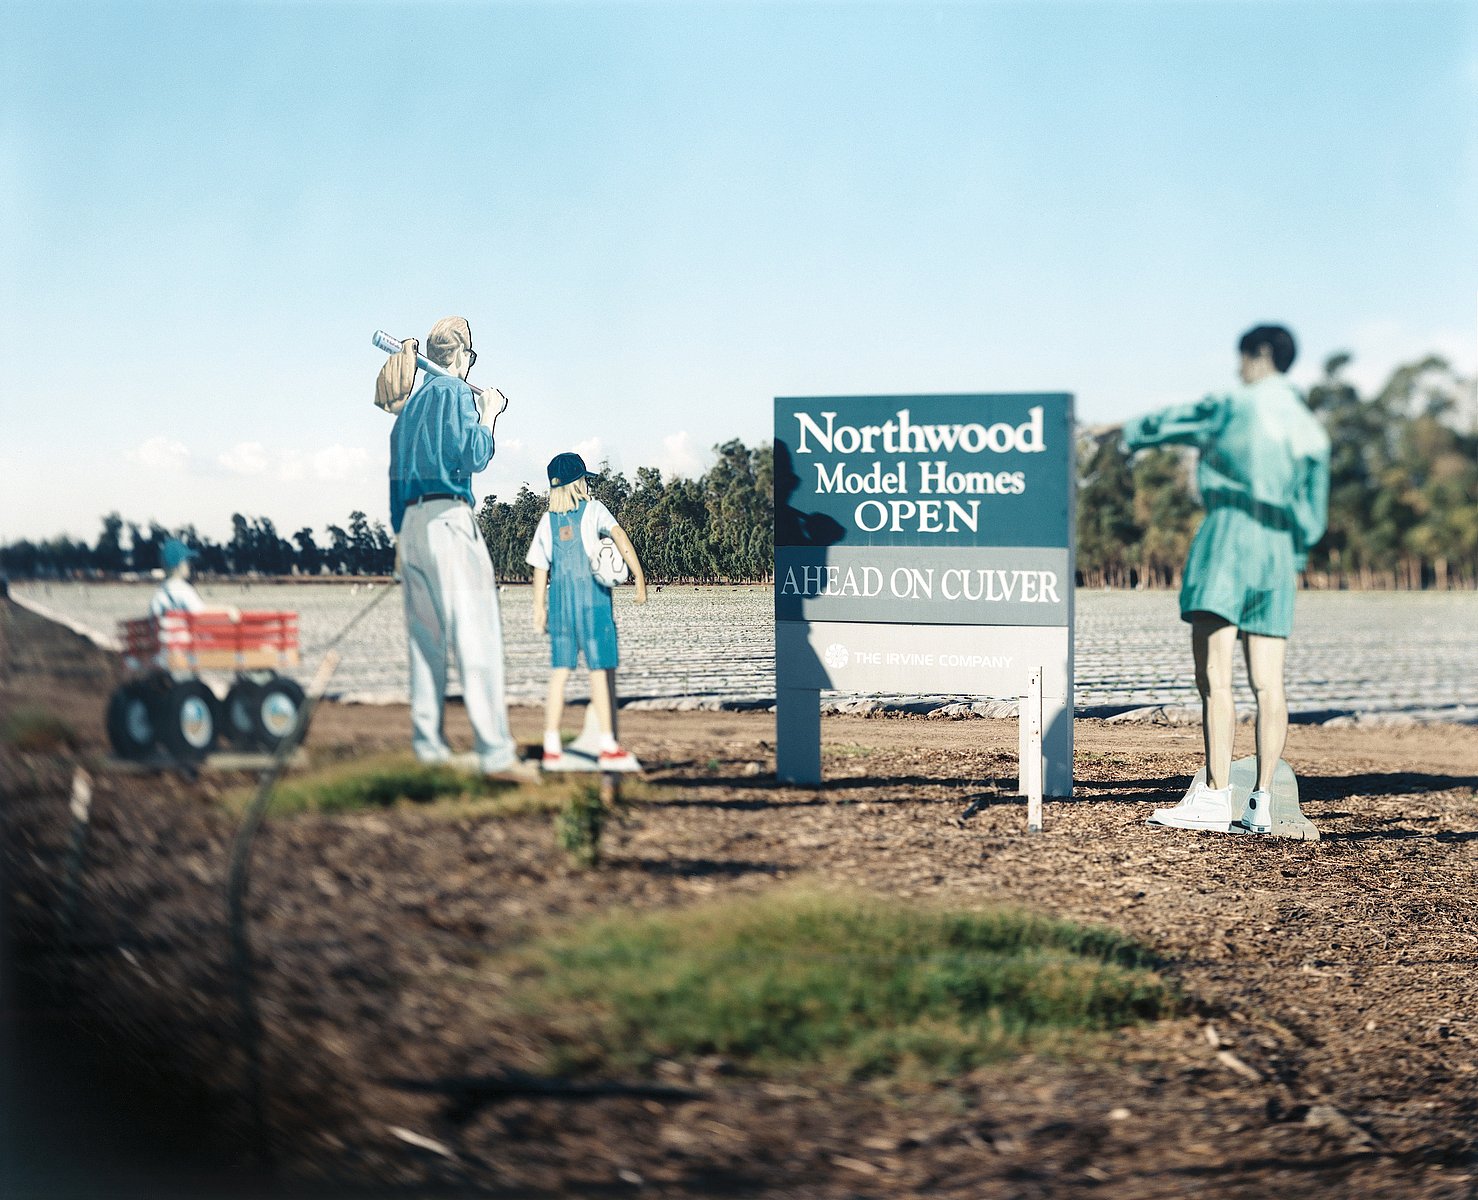 Untitled #1. 199664 x 80 cm(Sign advertising a new modelhome community at an intersection in Irvine. CA.)